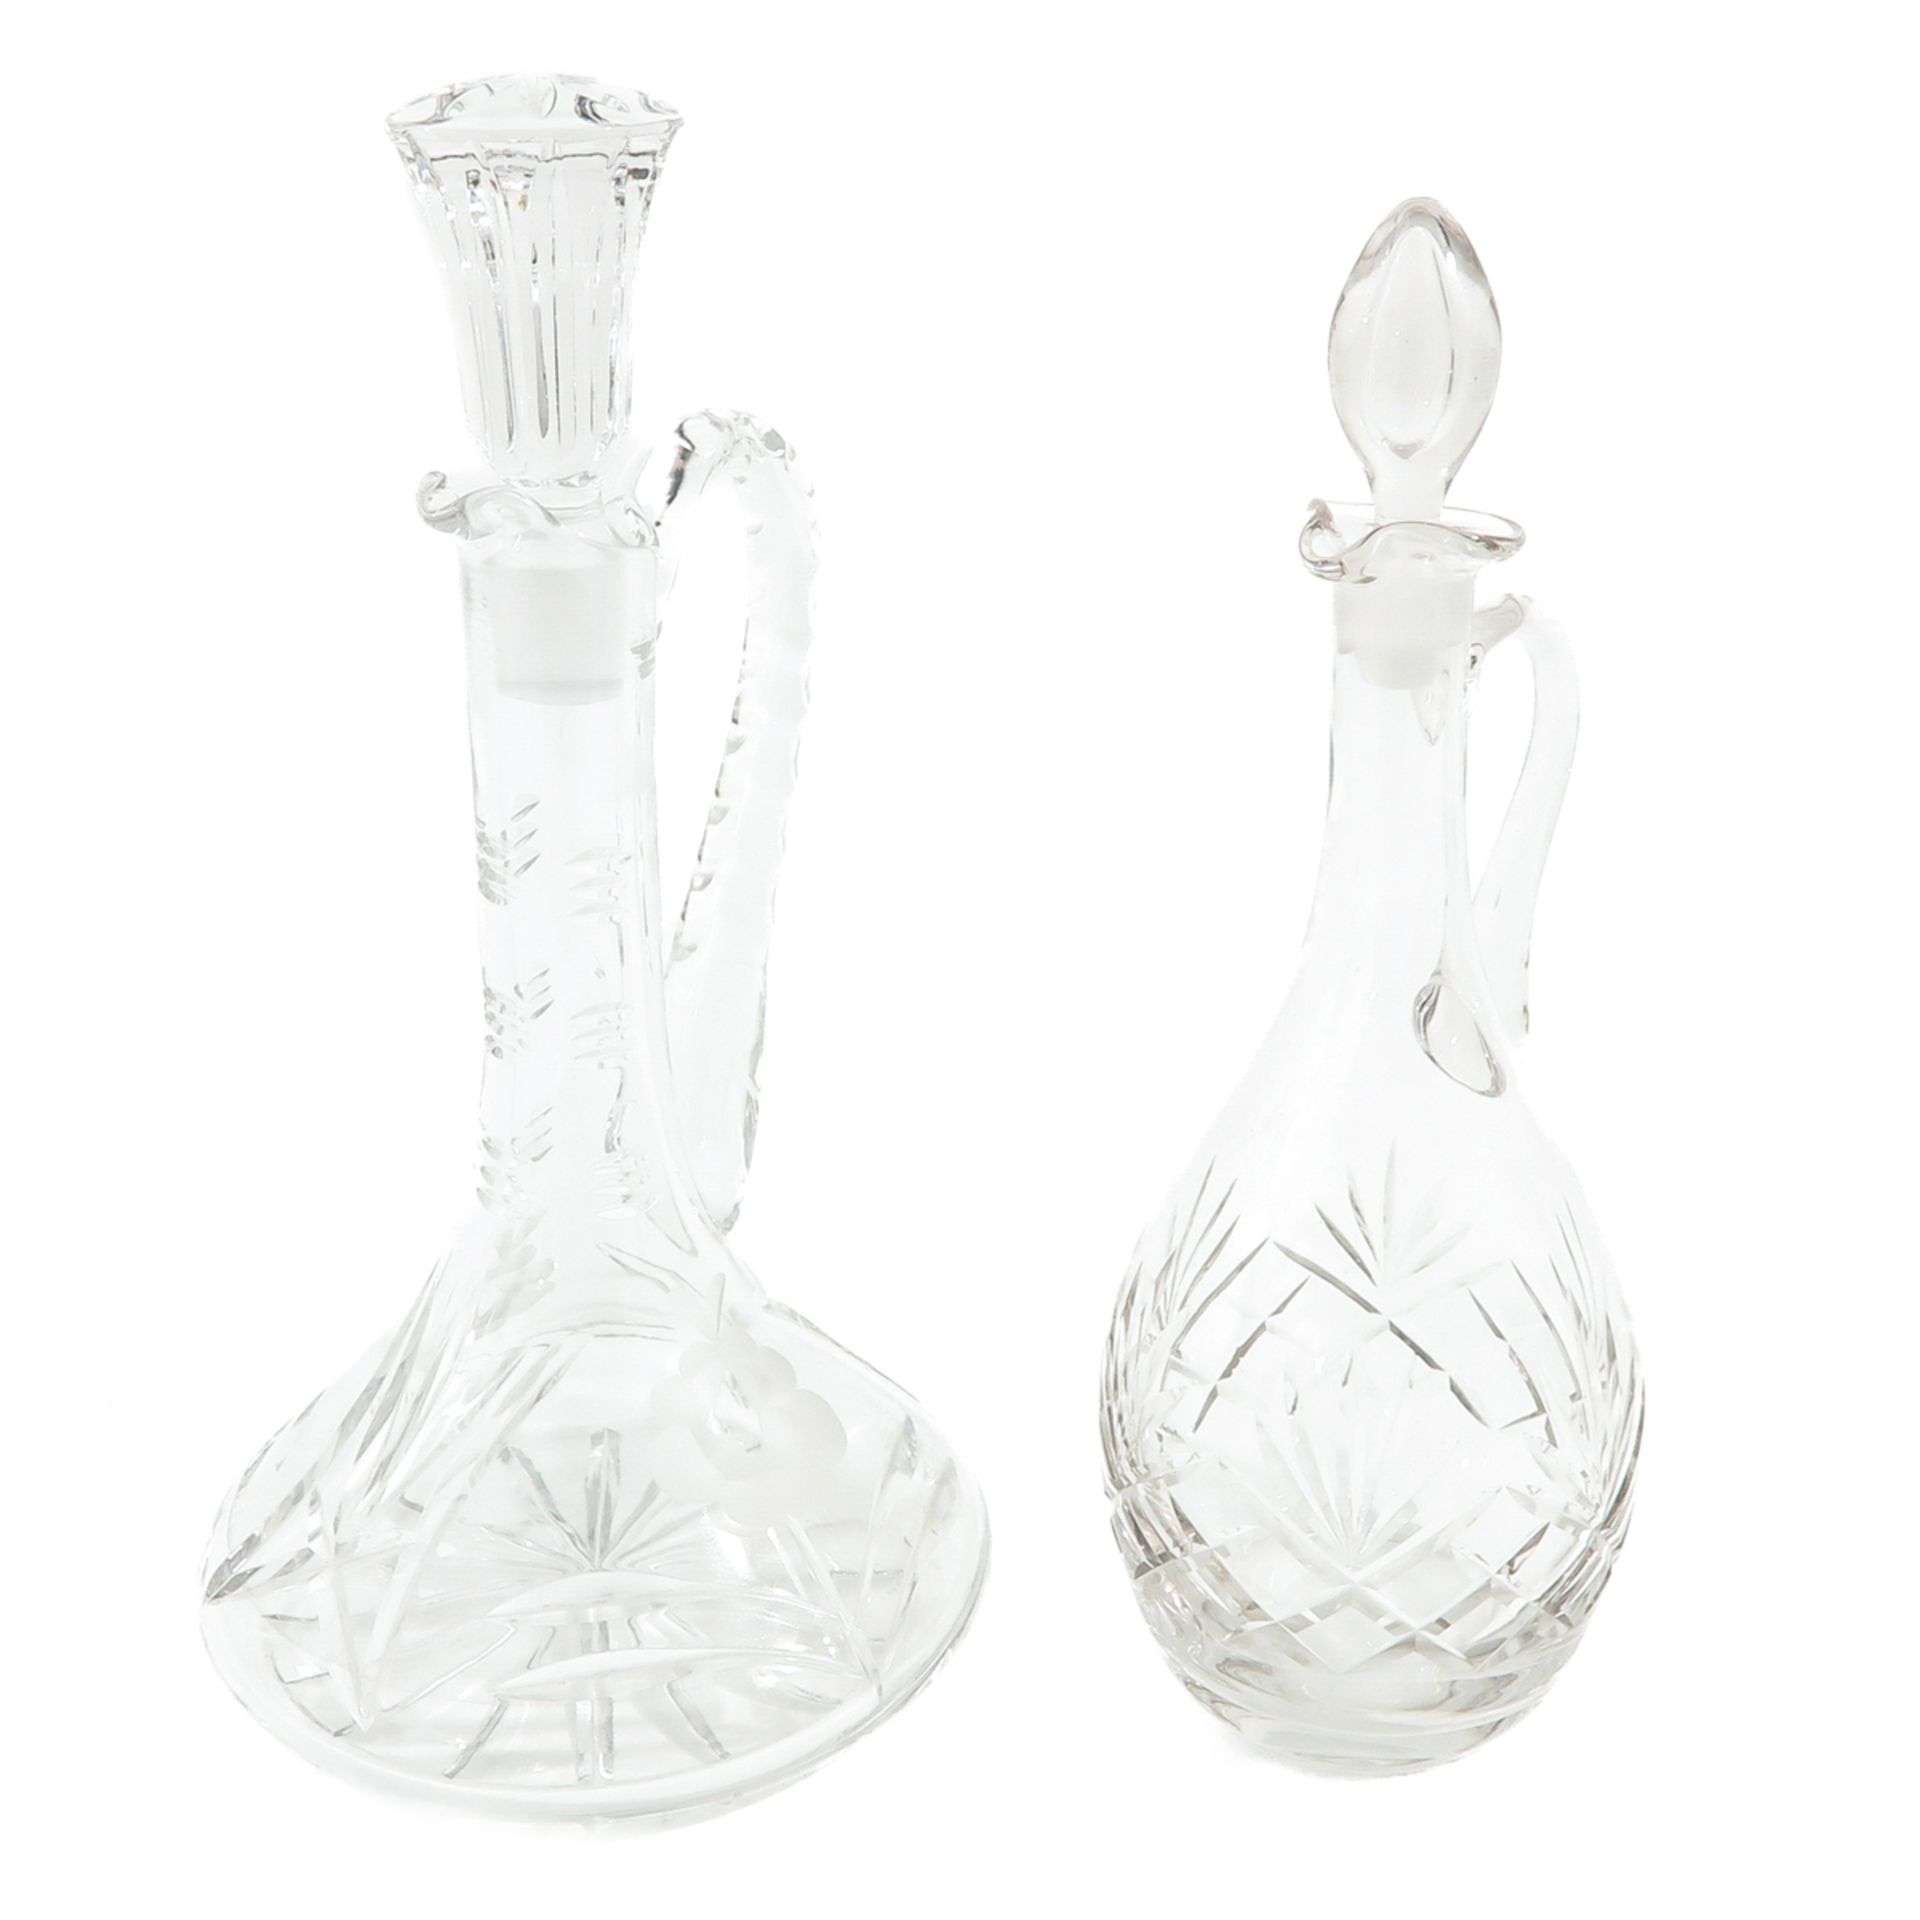 A Collection of Decanters - Image 8 of 10